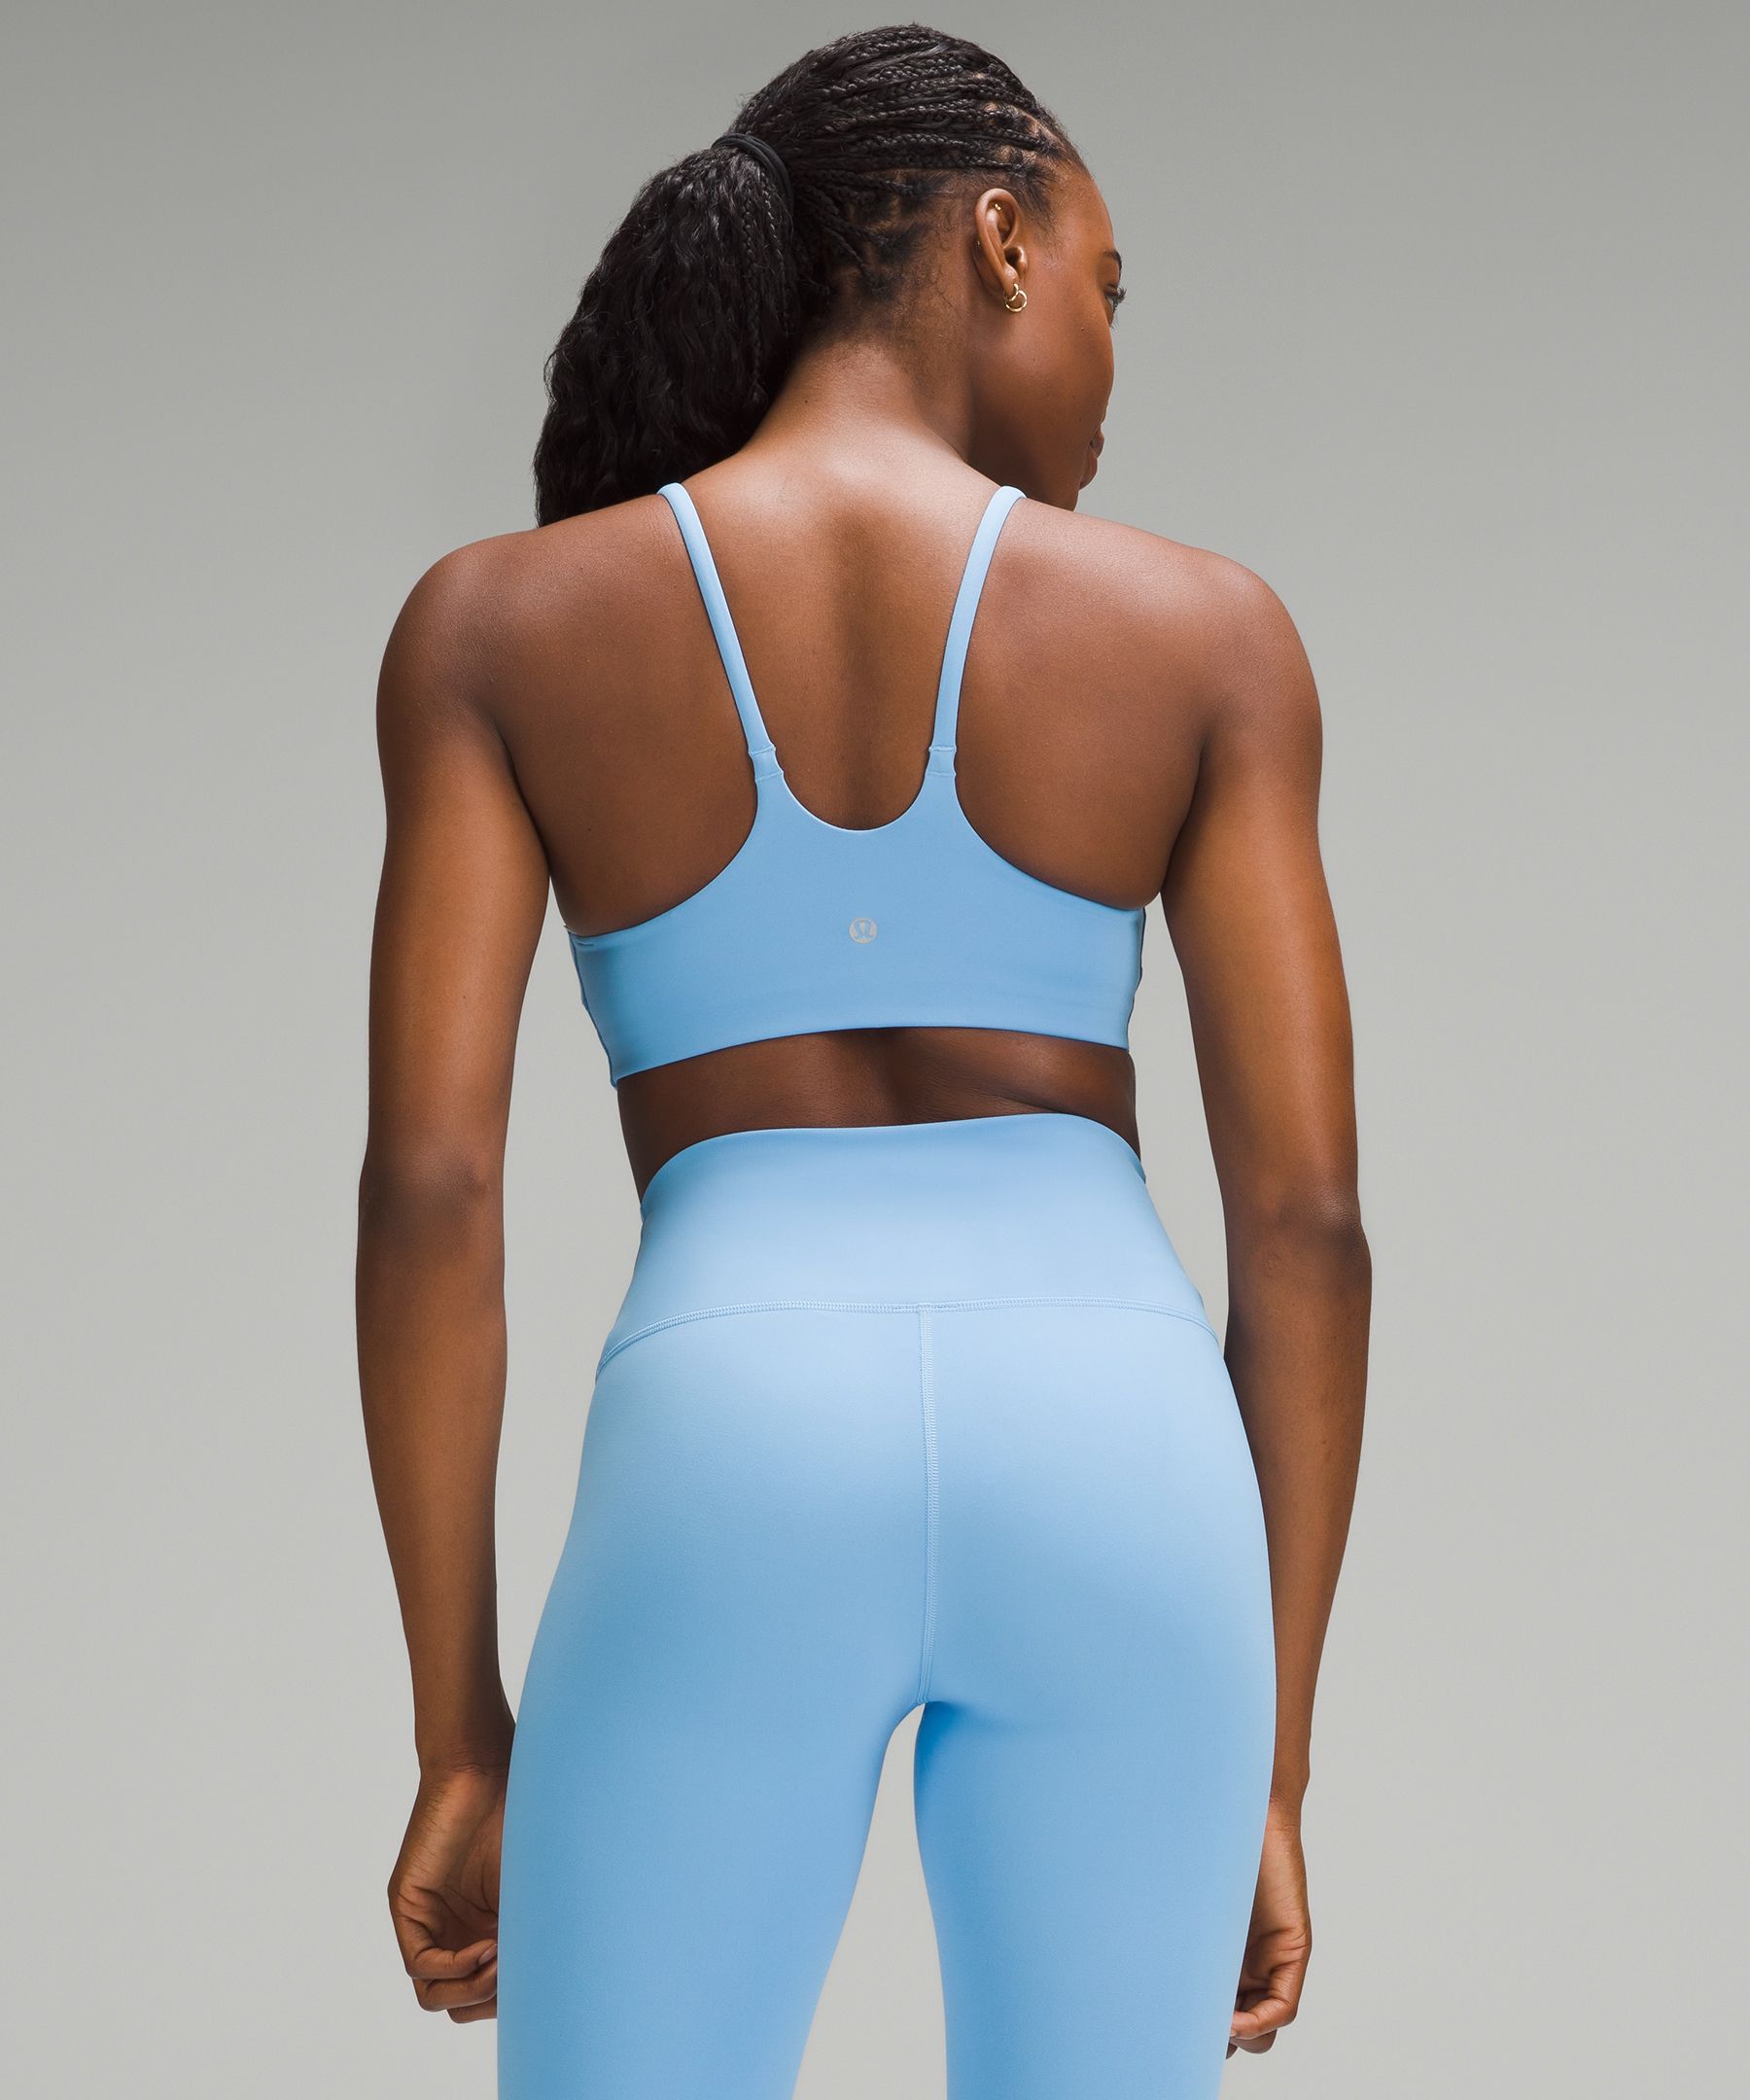 Shades of Blue 💙 Energy Bra in Breezy and Wunder Trains in